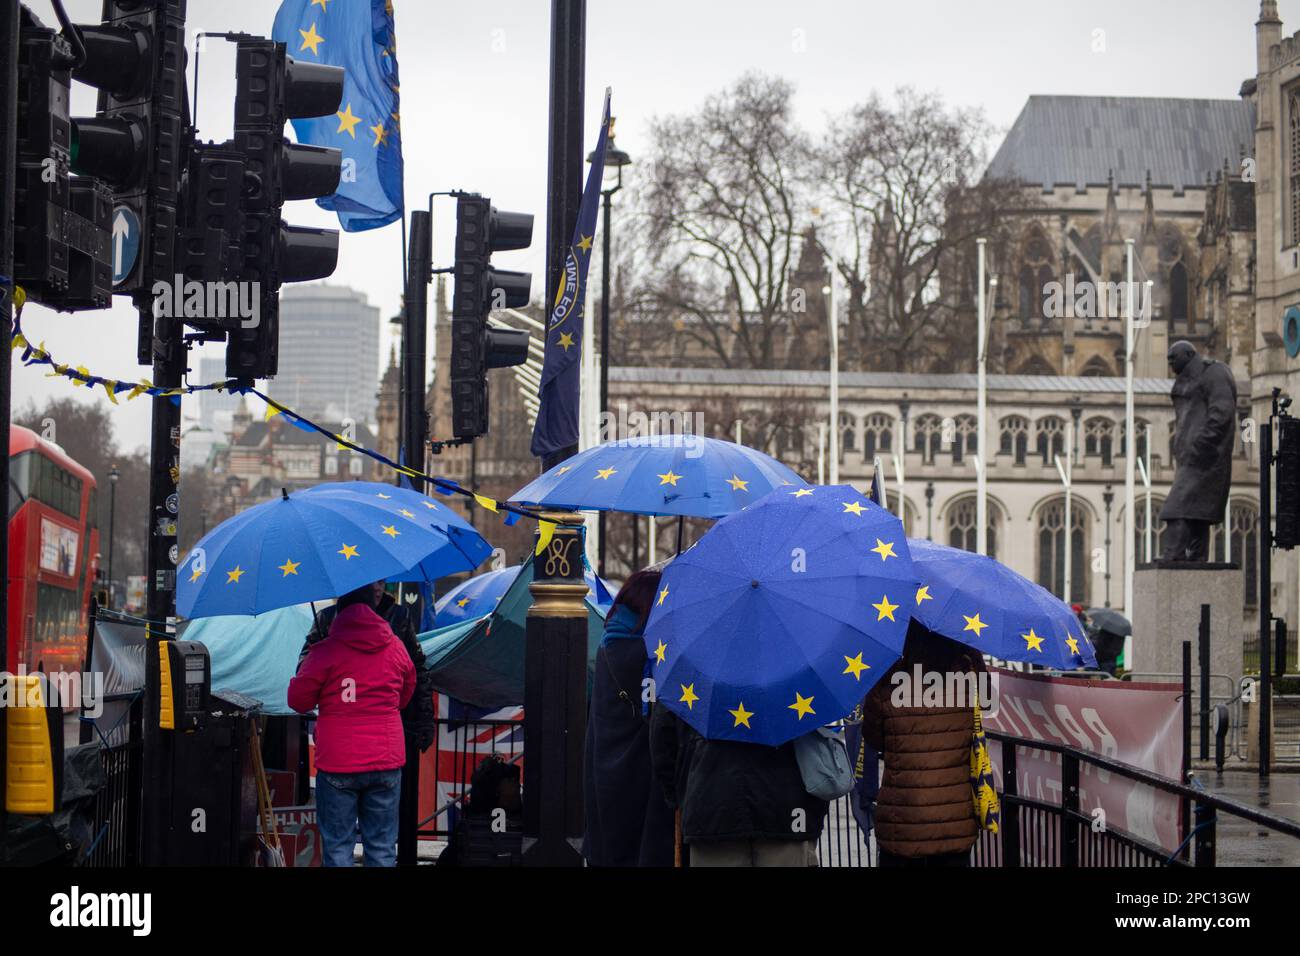 Anti-Brexit campaigners continue their protests outside Parliament, urging MPs to rejoin the EU. Credit: Sinai Noor/Alamy Stock Photo Stock Photo